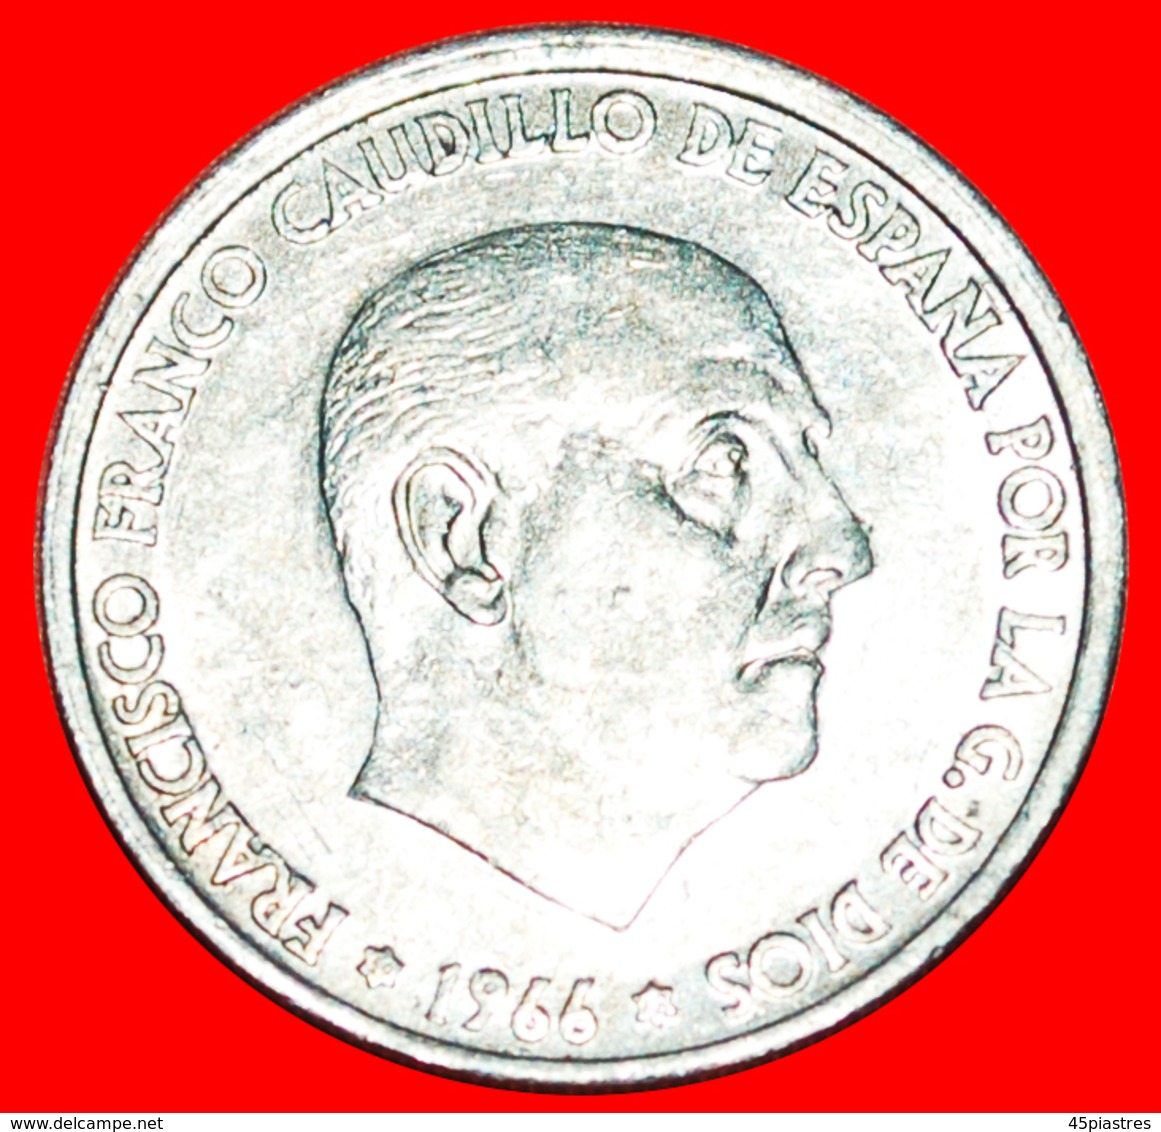 √ GENERALISSIMO FRANCO (1947-1975): SPAIN★ 50 CENTIMOS 1968 (1966) MINT LUSTER! LOW START ★ NO RESERVE! - 50 Céntimos